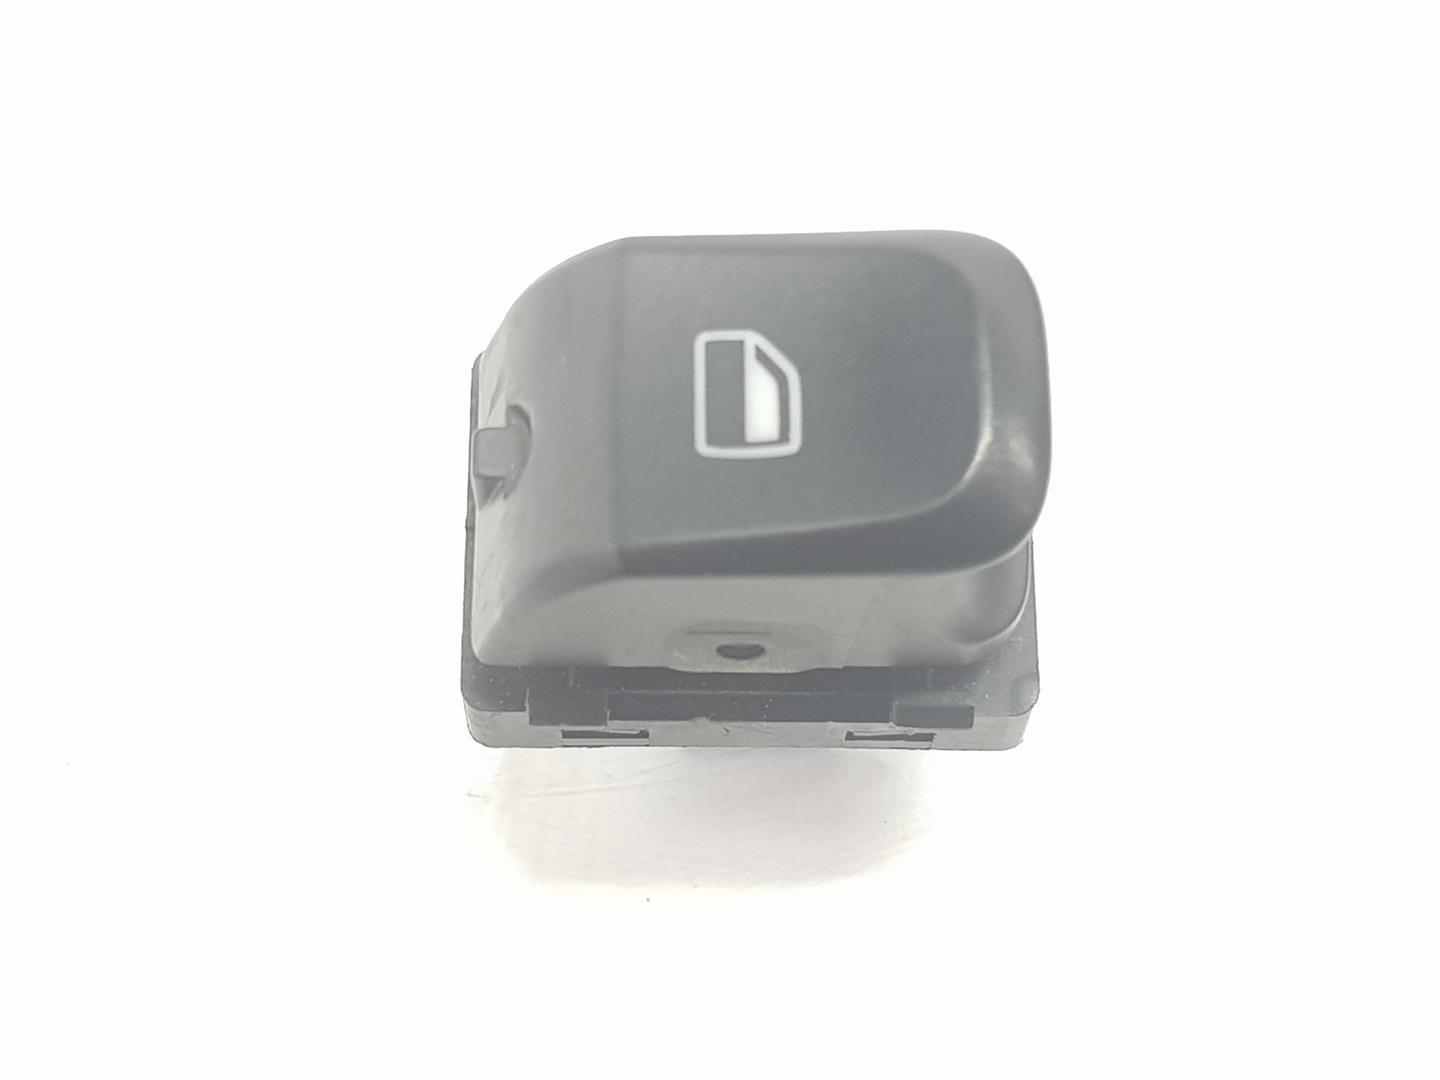 AUDI A6 C6/4F (2004-2011) Front Right Door Window Switch 8K0959855A, 8K0959855A, 2222DL 19877859